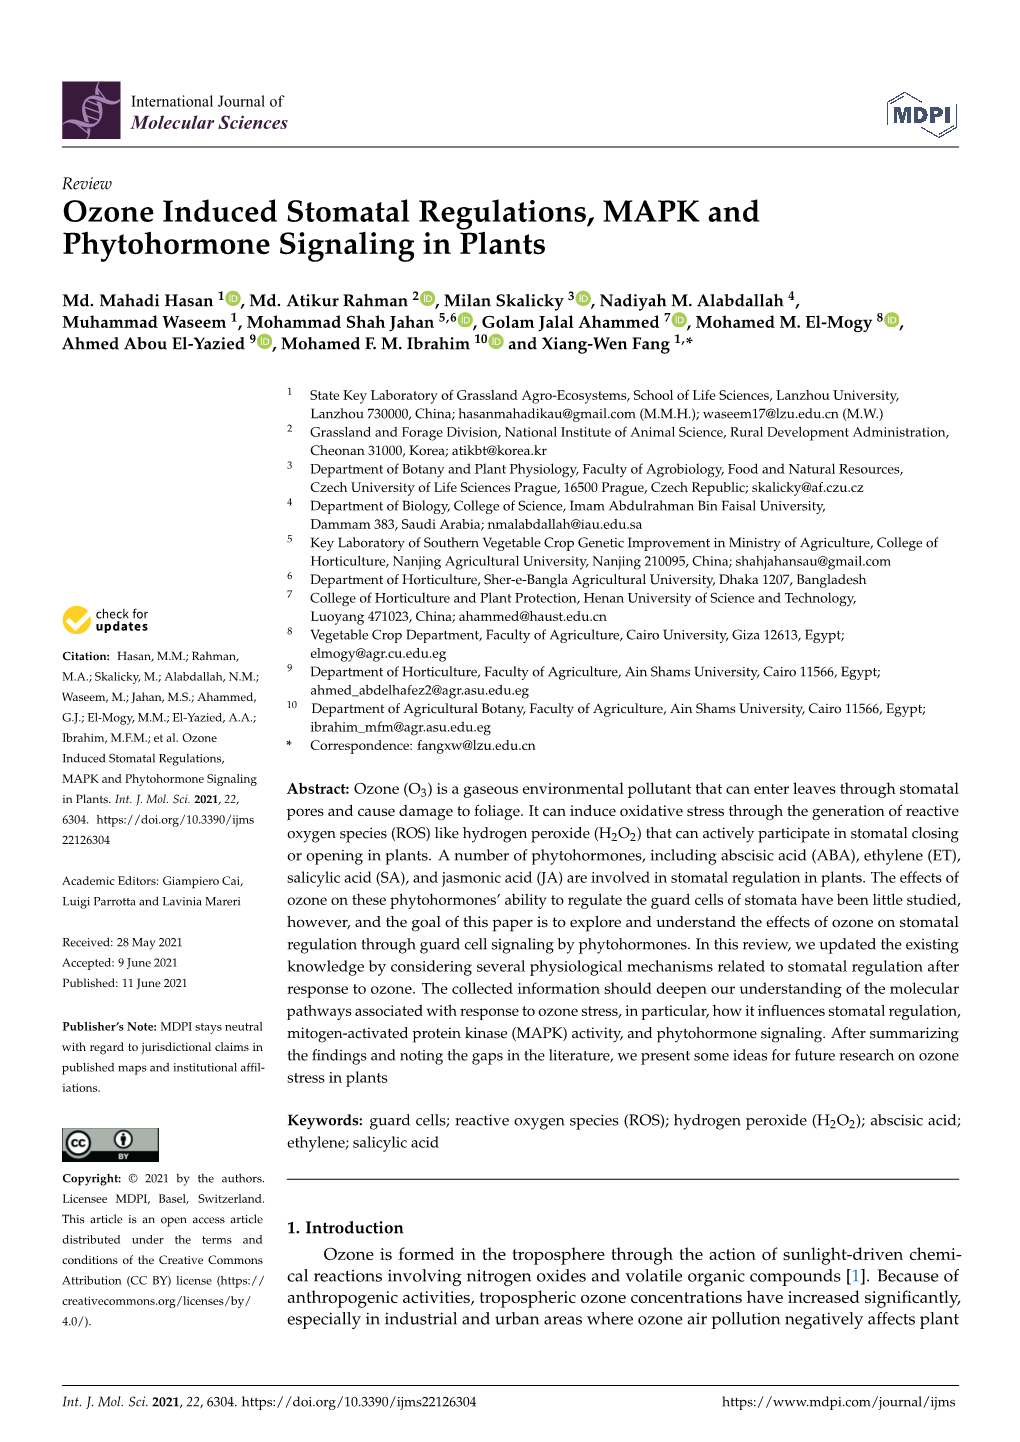 Ozone Induced Stomatal Regulations, MAPK and Phytohormone Signaling in Plants